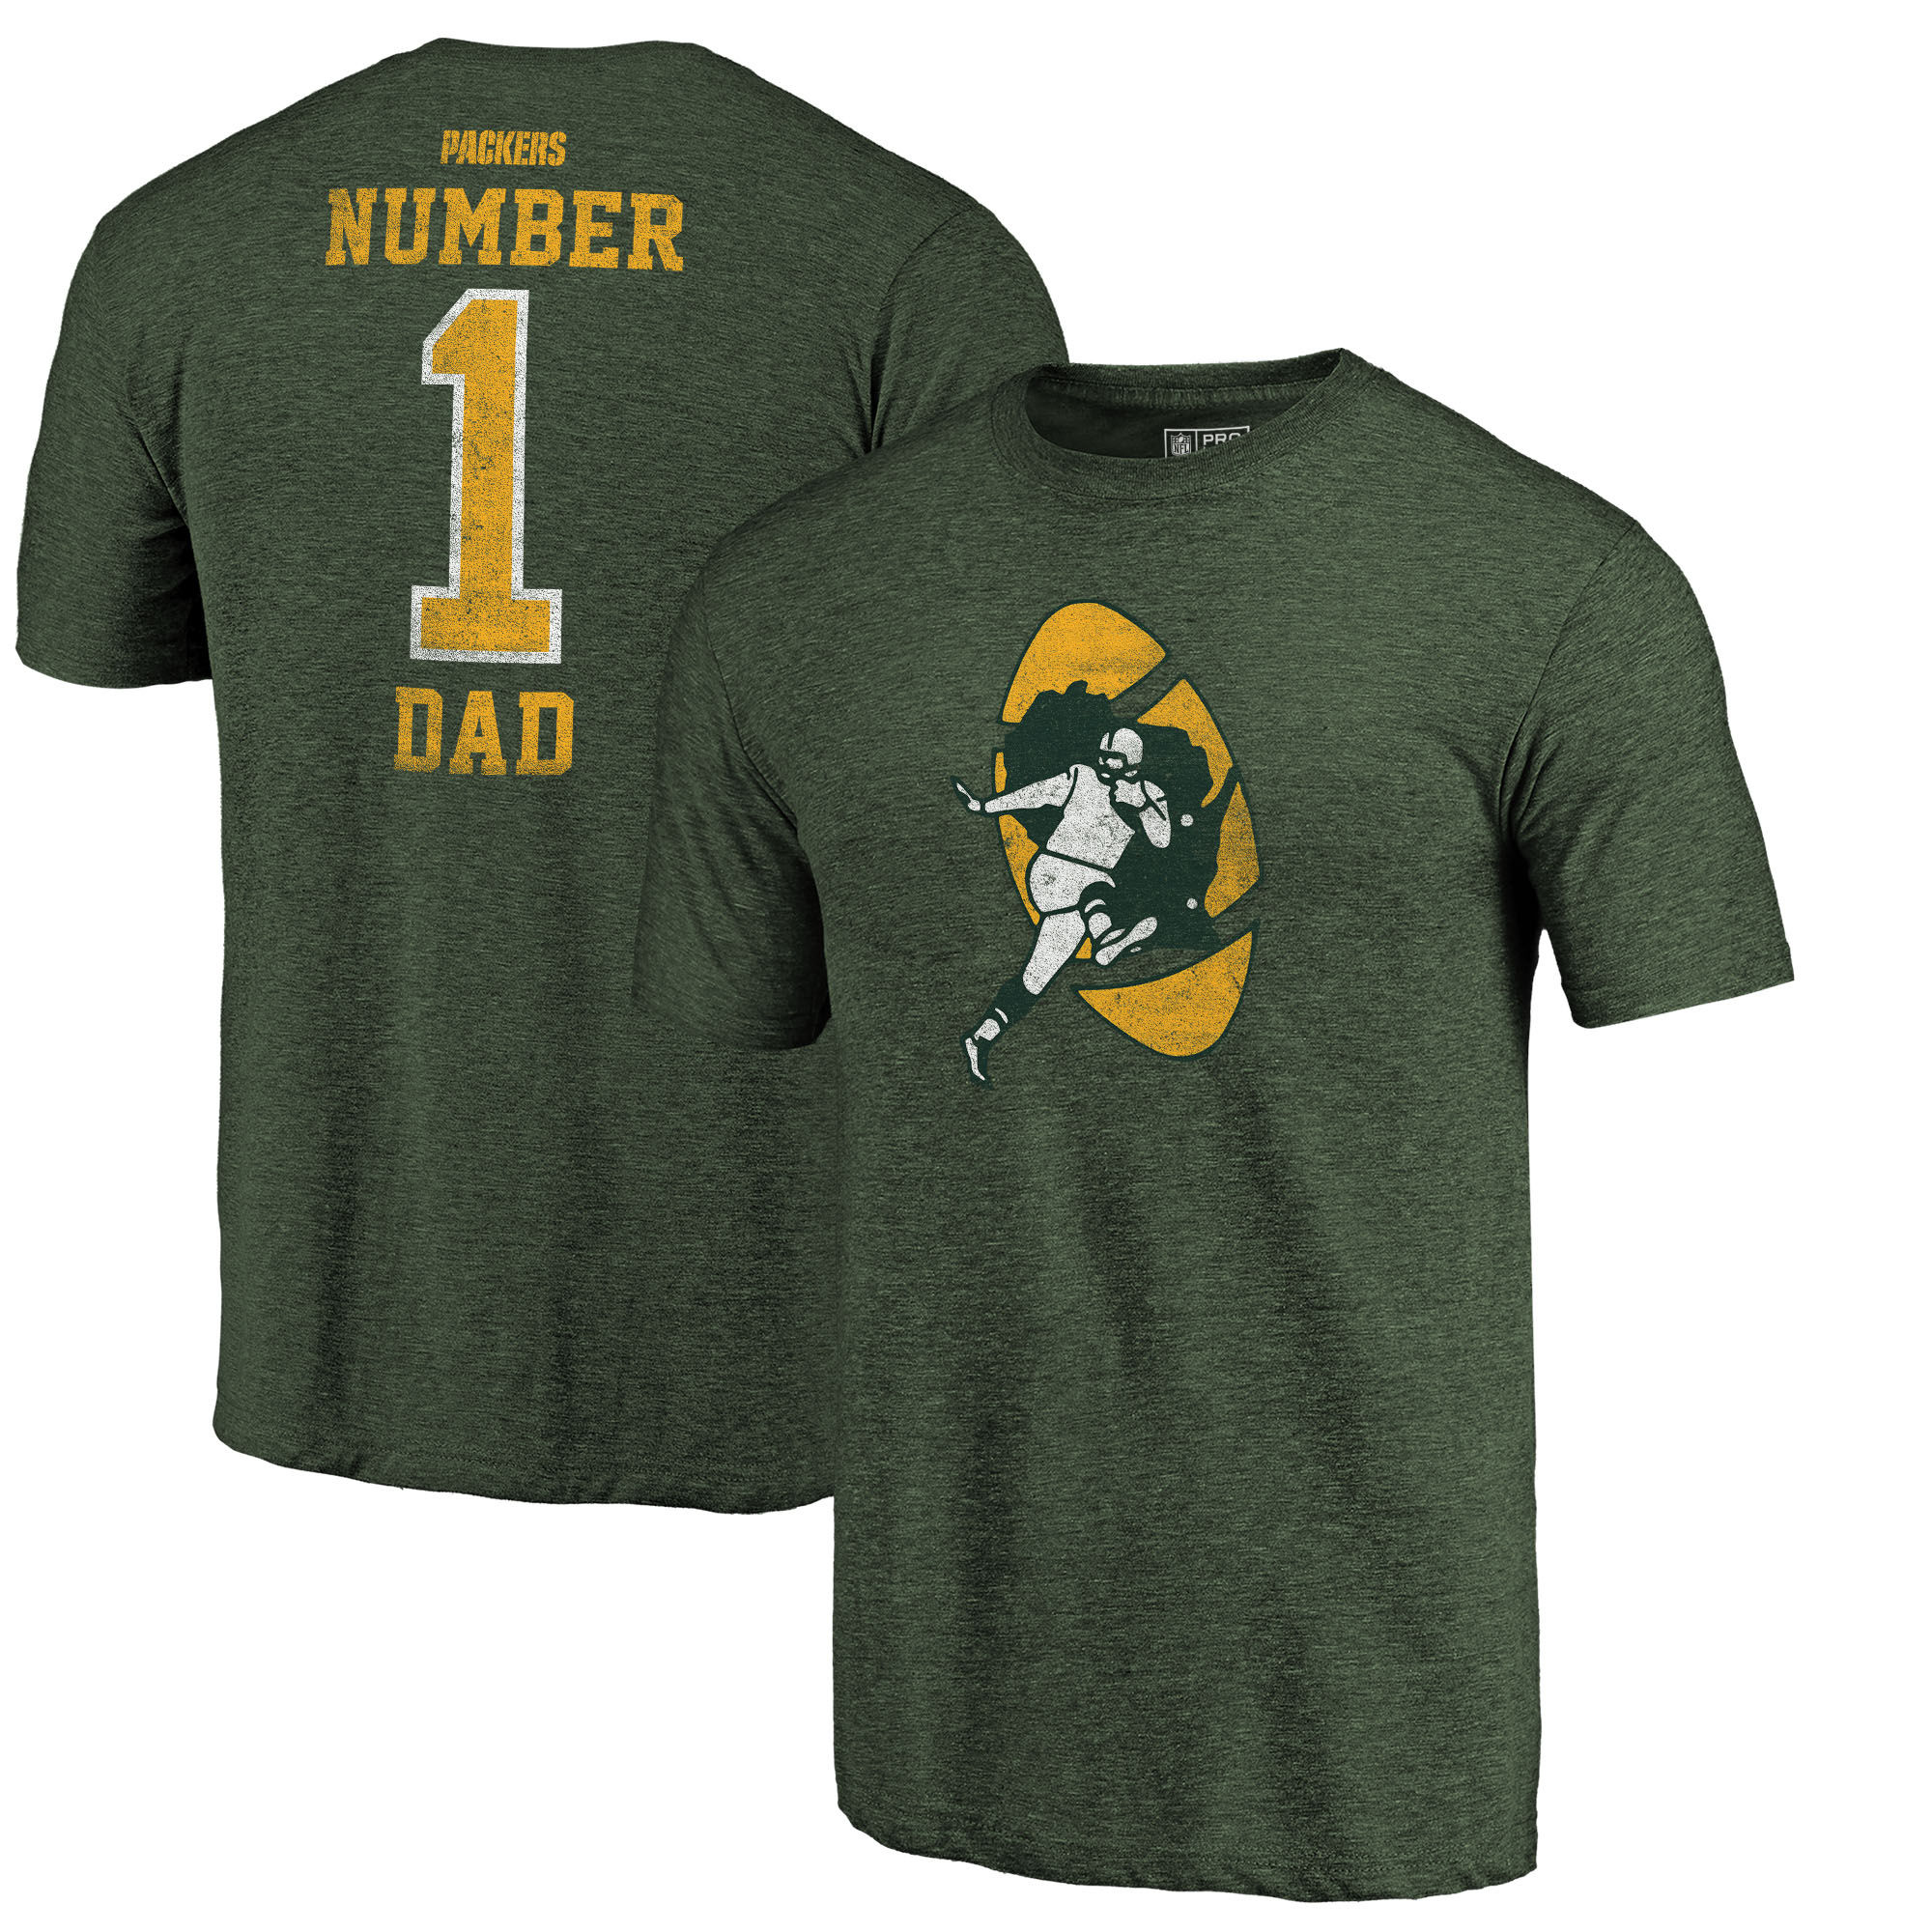 Green Bay Packers NFL Pro Line by Fanatics Branded Green Greatest Dad Retro Tri-Blend T-Shirt